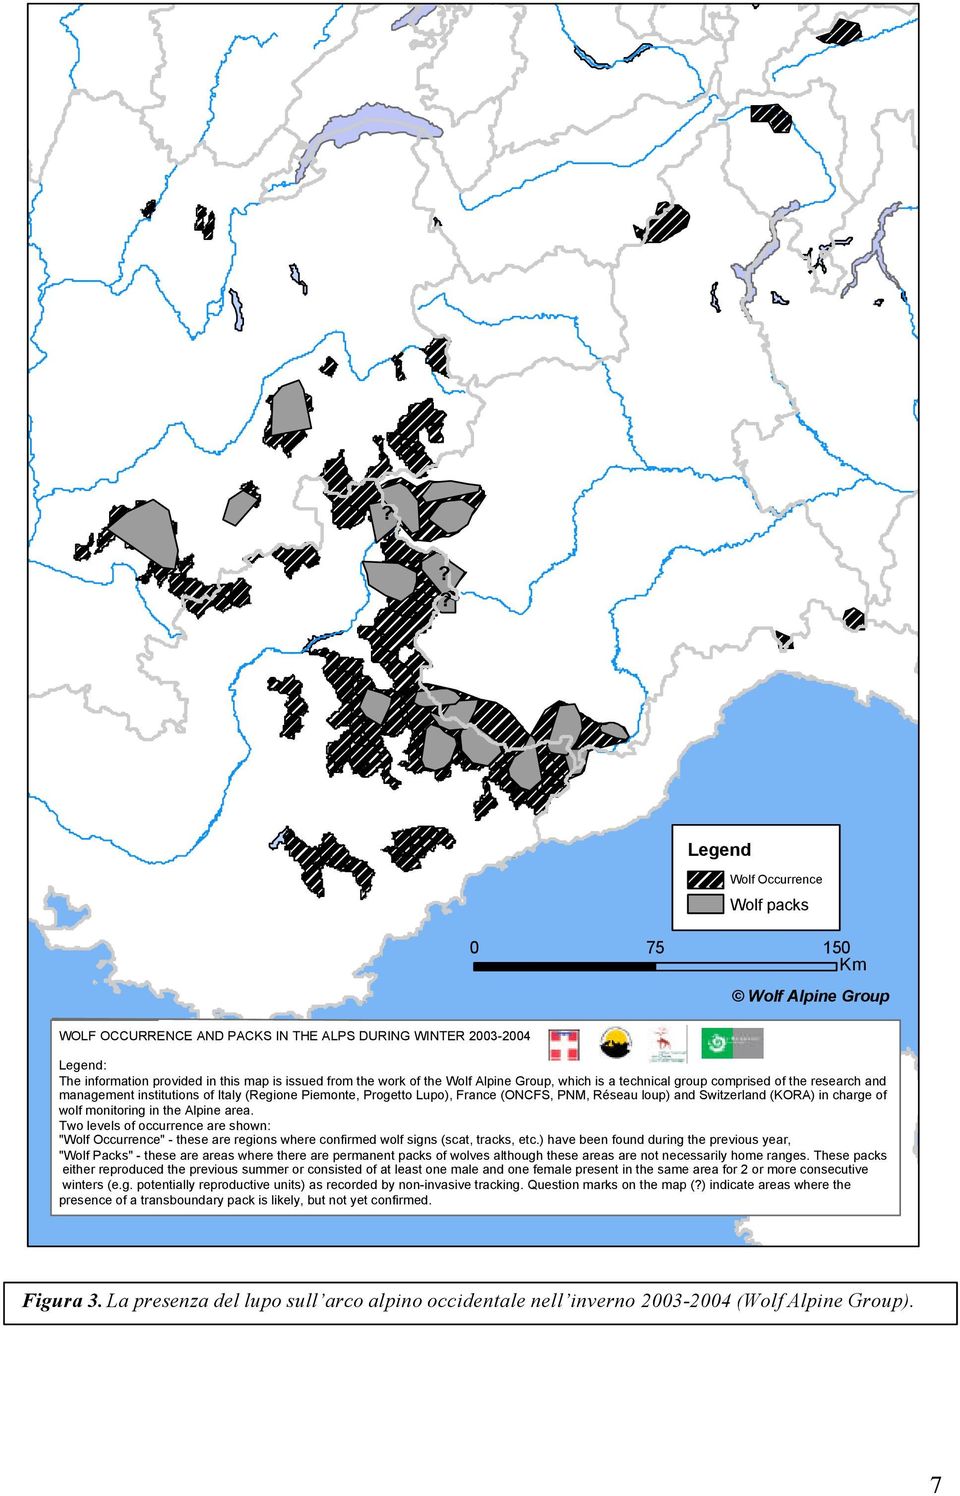 Switzerland (KORA) in charge of wolf monitoring in the Alpine area. Two levels of occurrence are shown: "Wolf Occurrence" - these are regions where confirmed wolf signs (scat, tracks, etc.